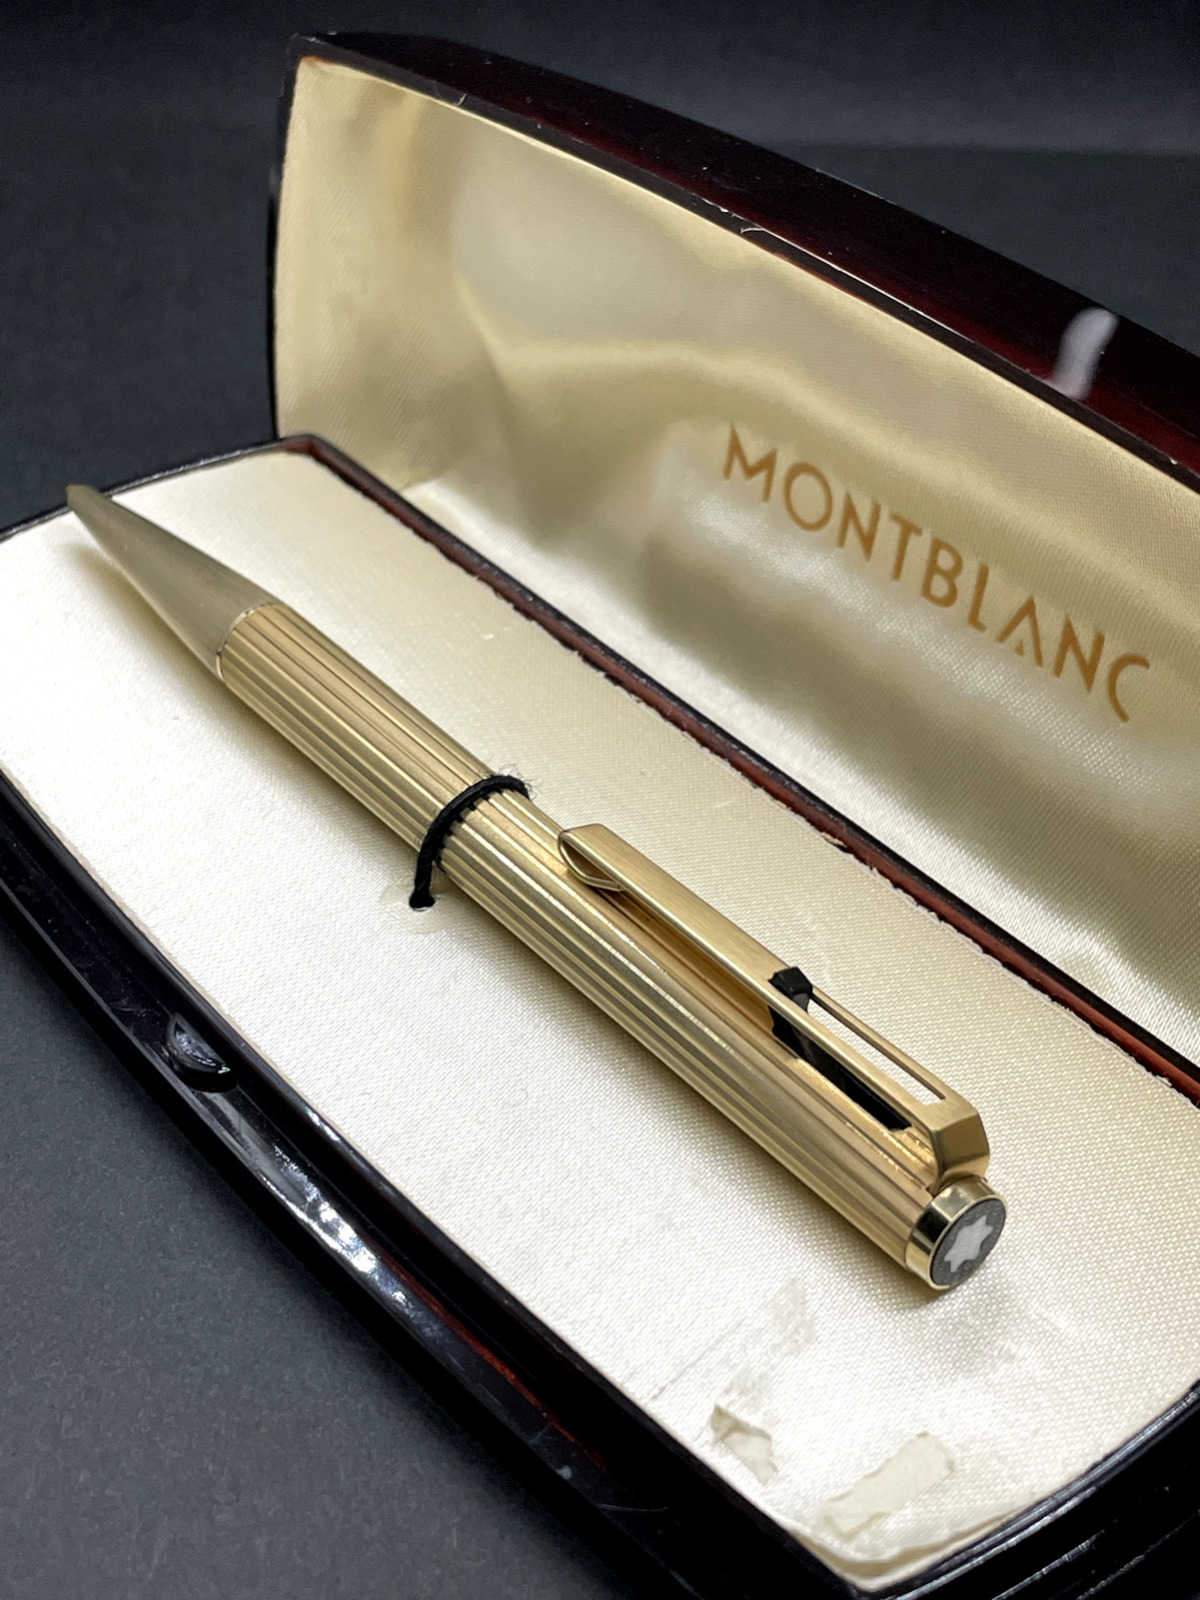 MONTBLANC No.7847 Gold Hammer Trigger Vintage Ballpoint Pen with BOX